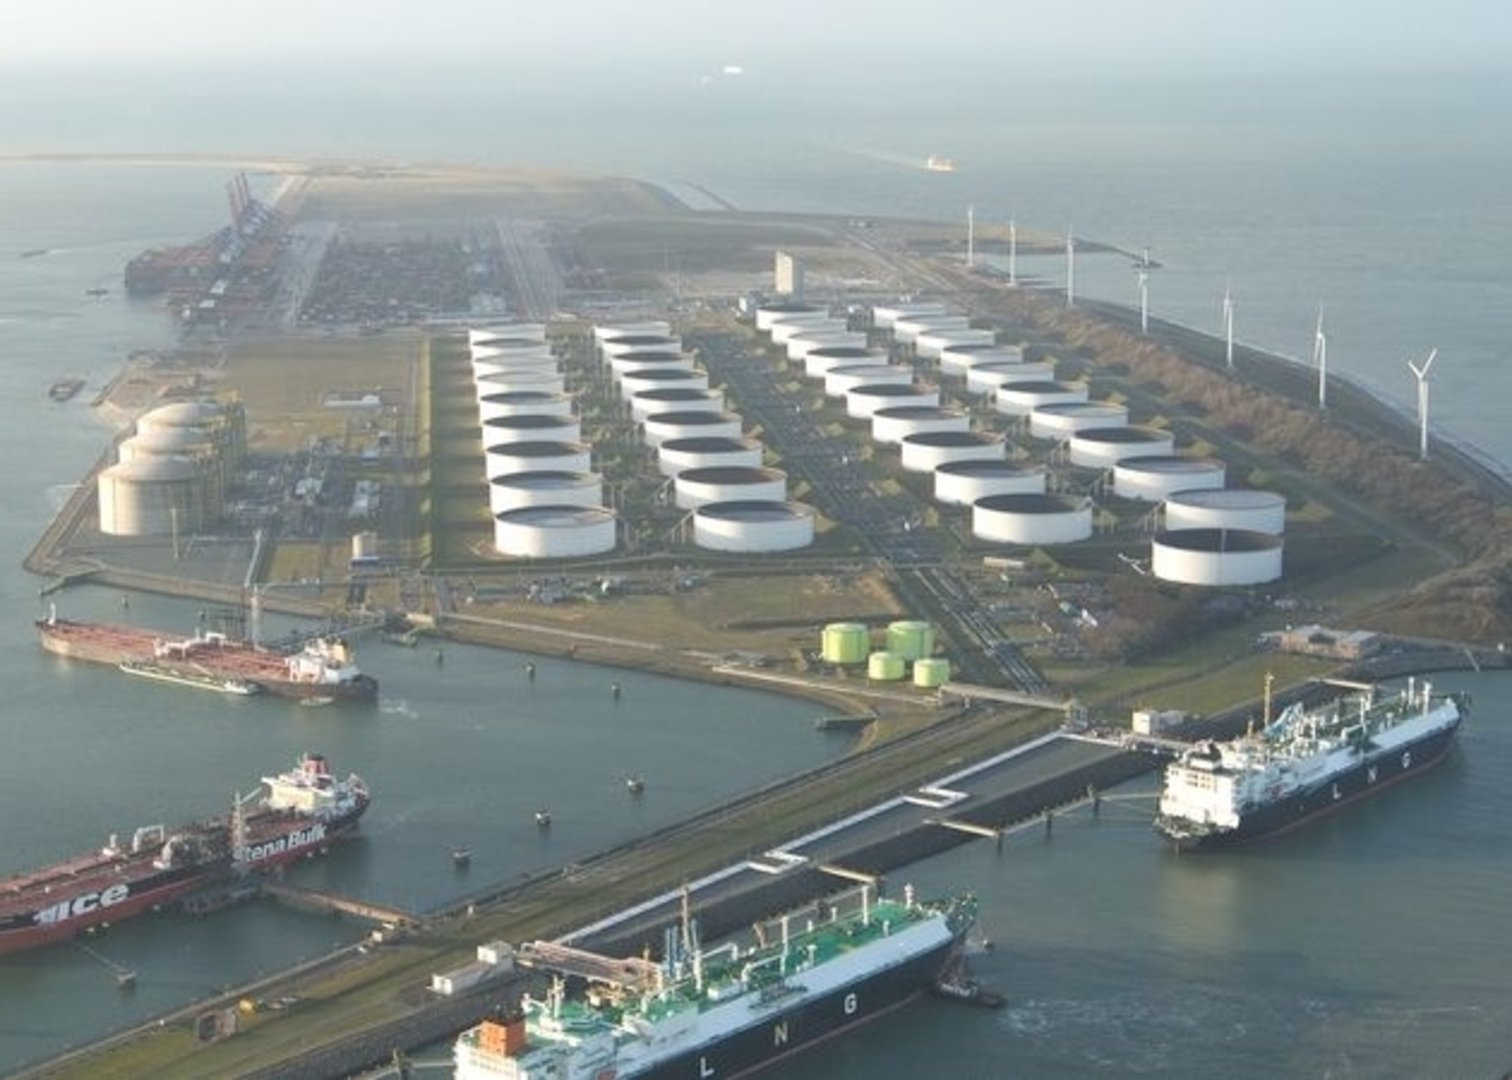 LNG imports rose 78% in the first quarter compared to a year earlier to 2.7 million tonnes.